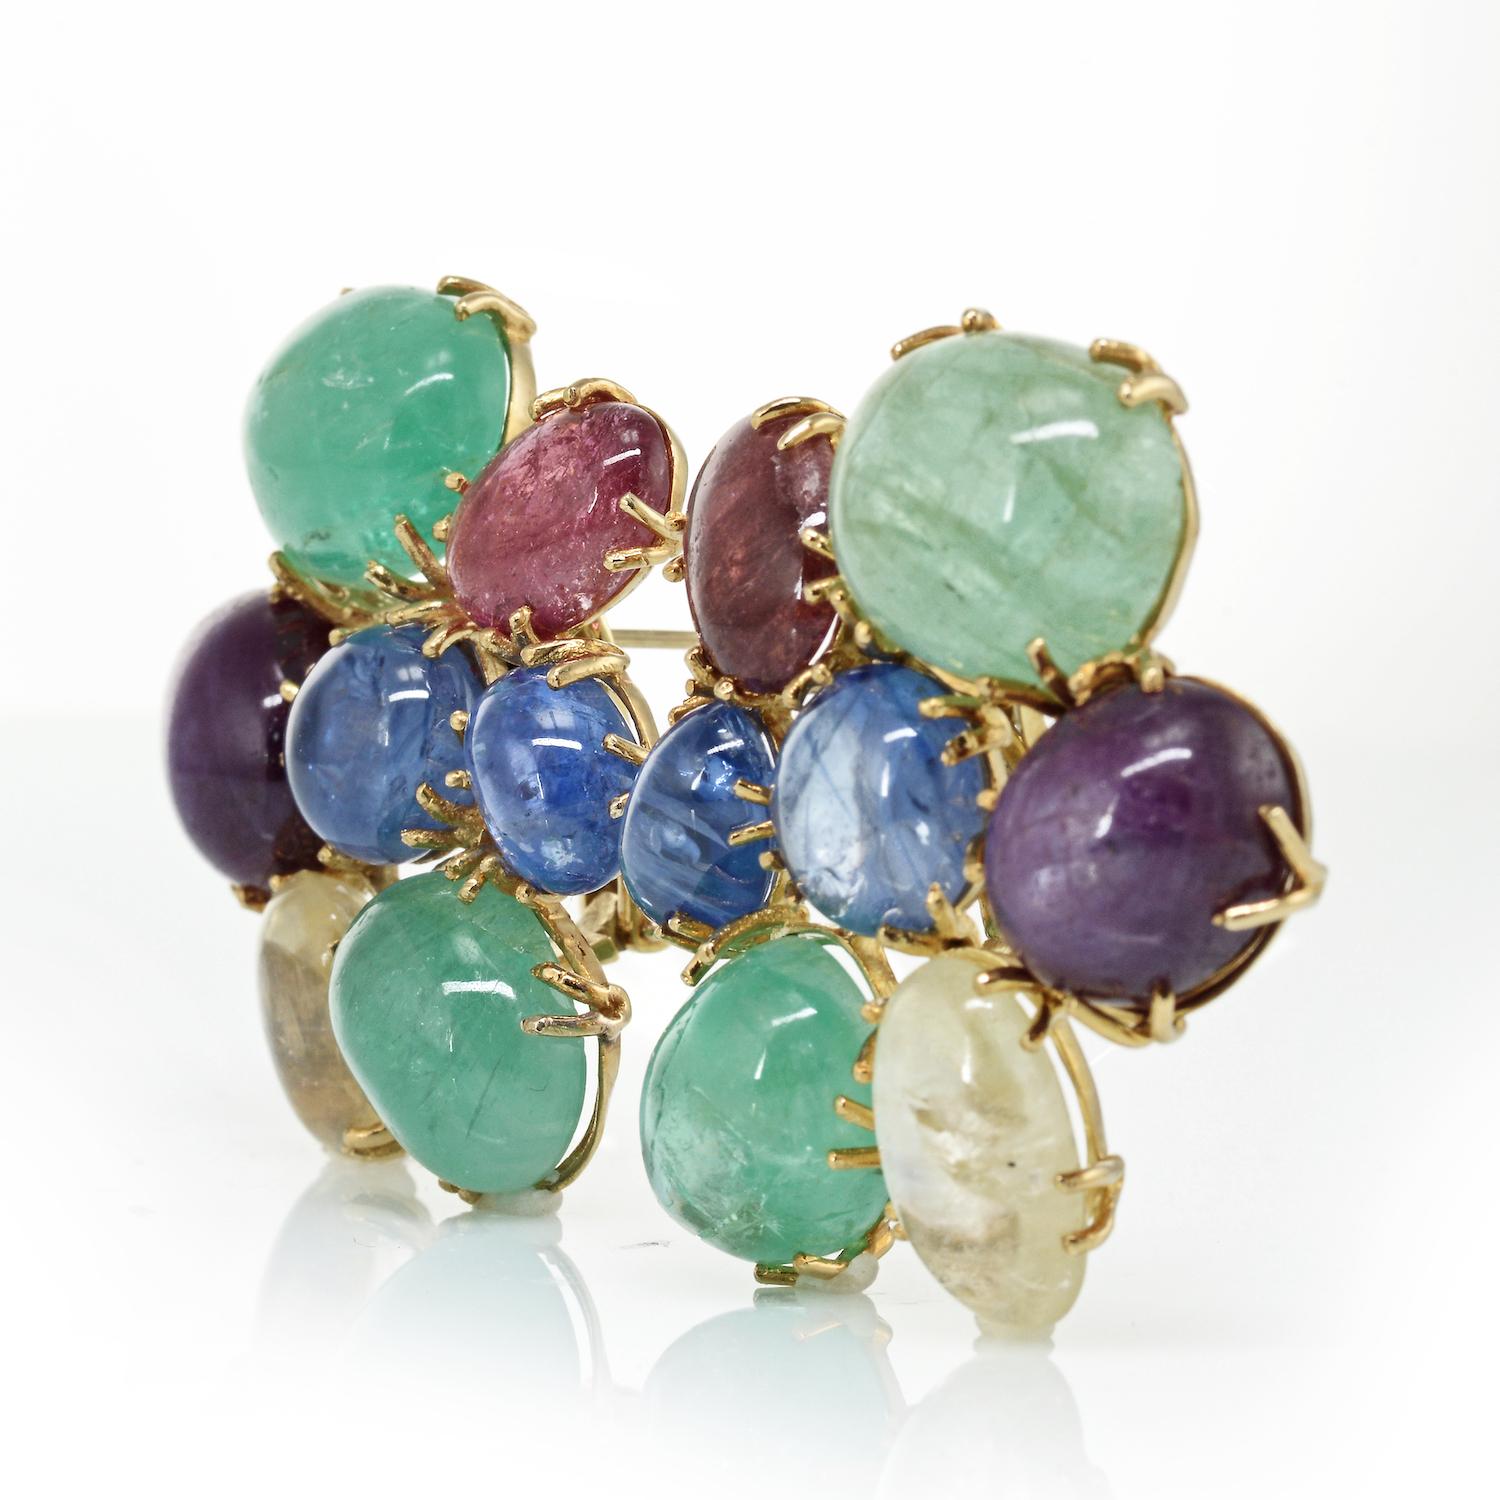 Seaman Schepps, son of immigrants, grew up in New York's Lower East Side and was renowned for his chunky retro and 1950's jewelry. Rare original stones have been an inspiration throughout the history of the company and continue to be to this